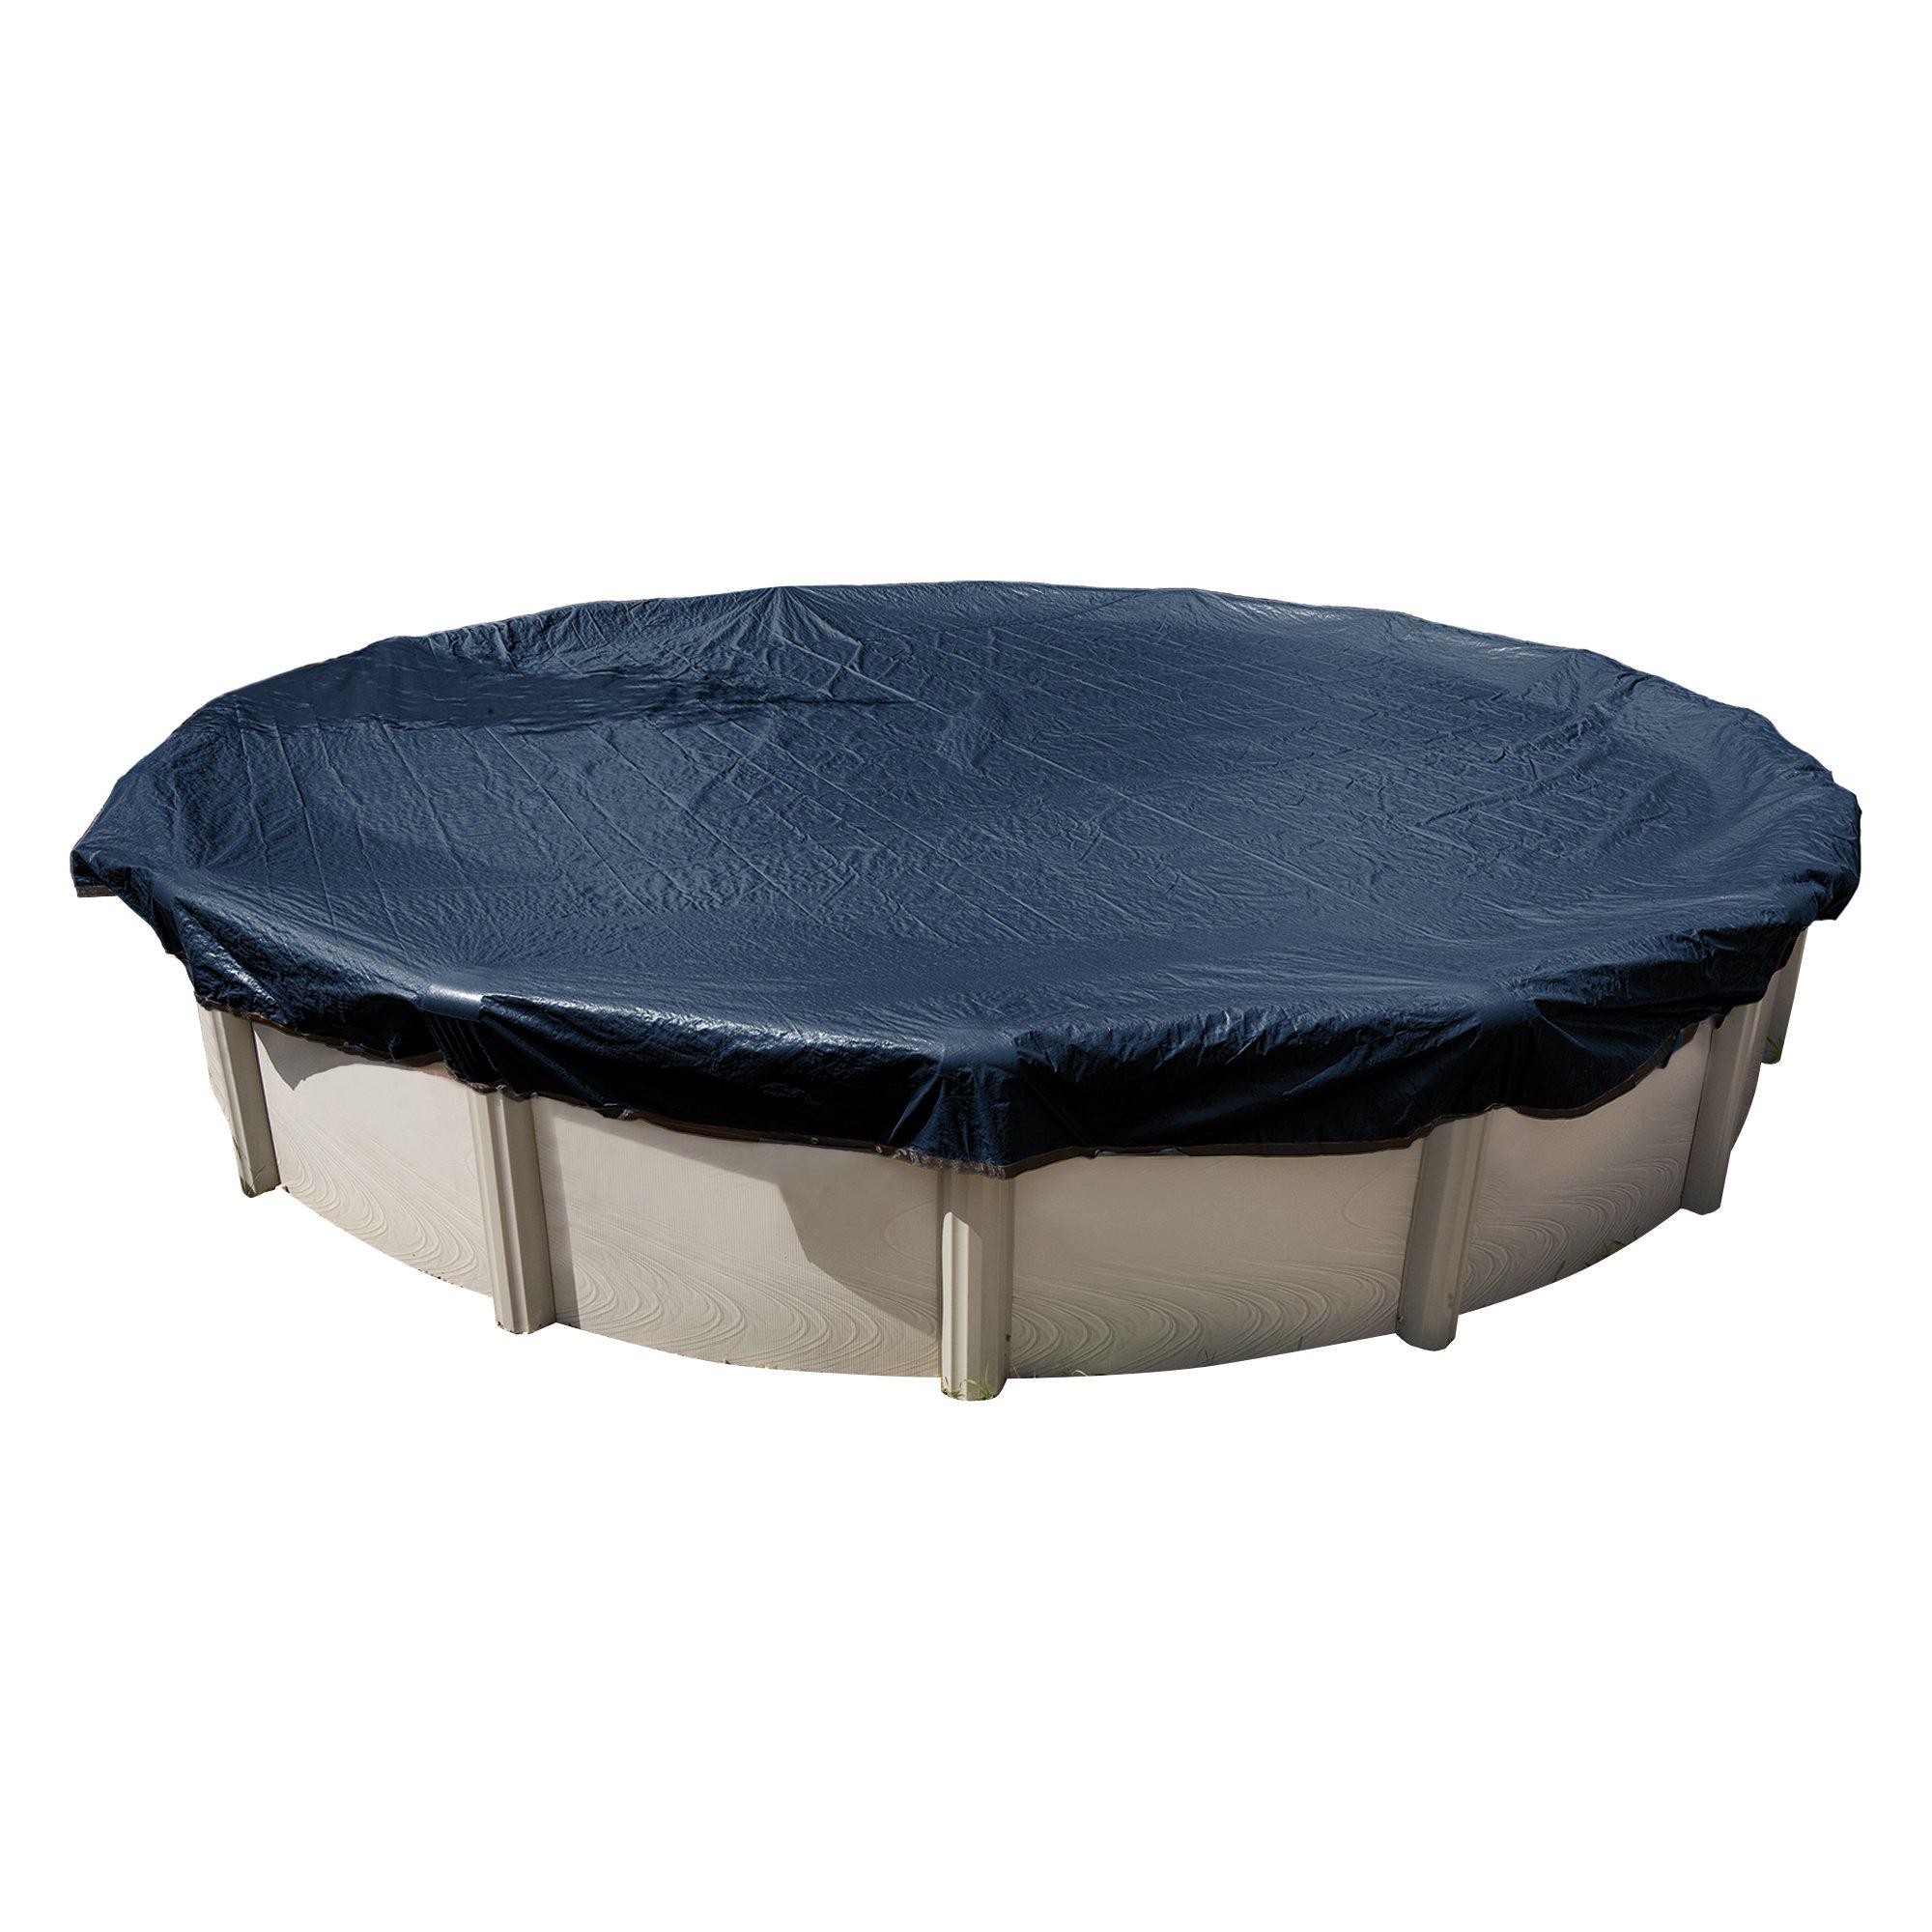 Midwest Canvas  12 Round Winter Pool Cover 8 Year Warranty Blue